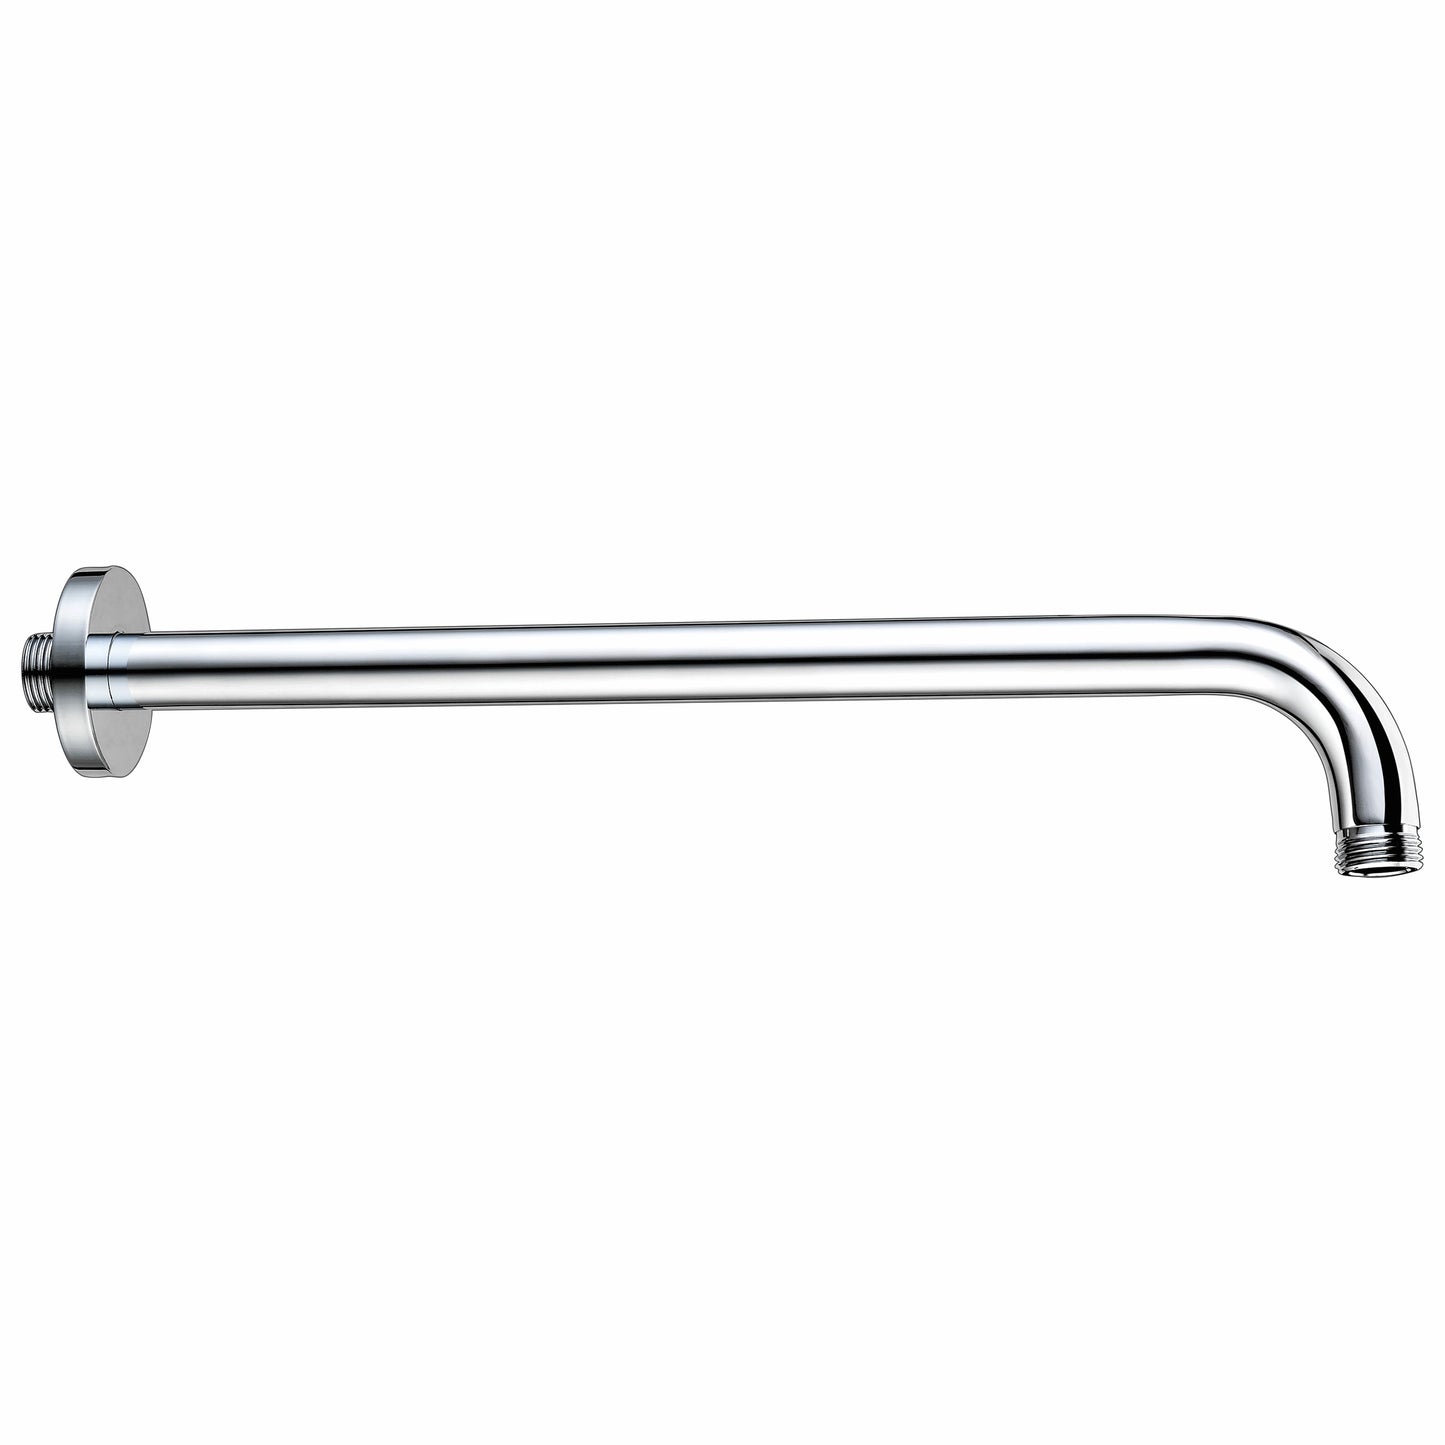 Stainless Steel Chrome Shower Wall Arm